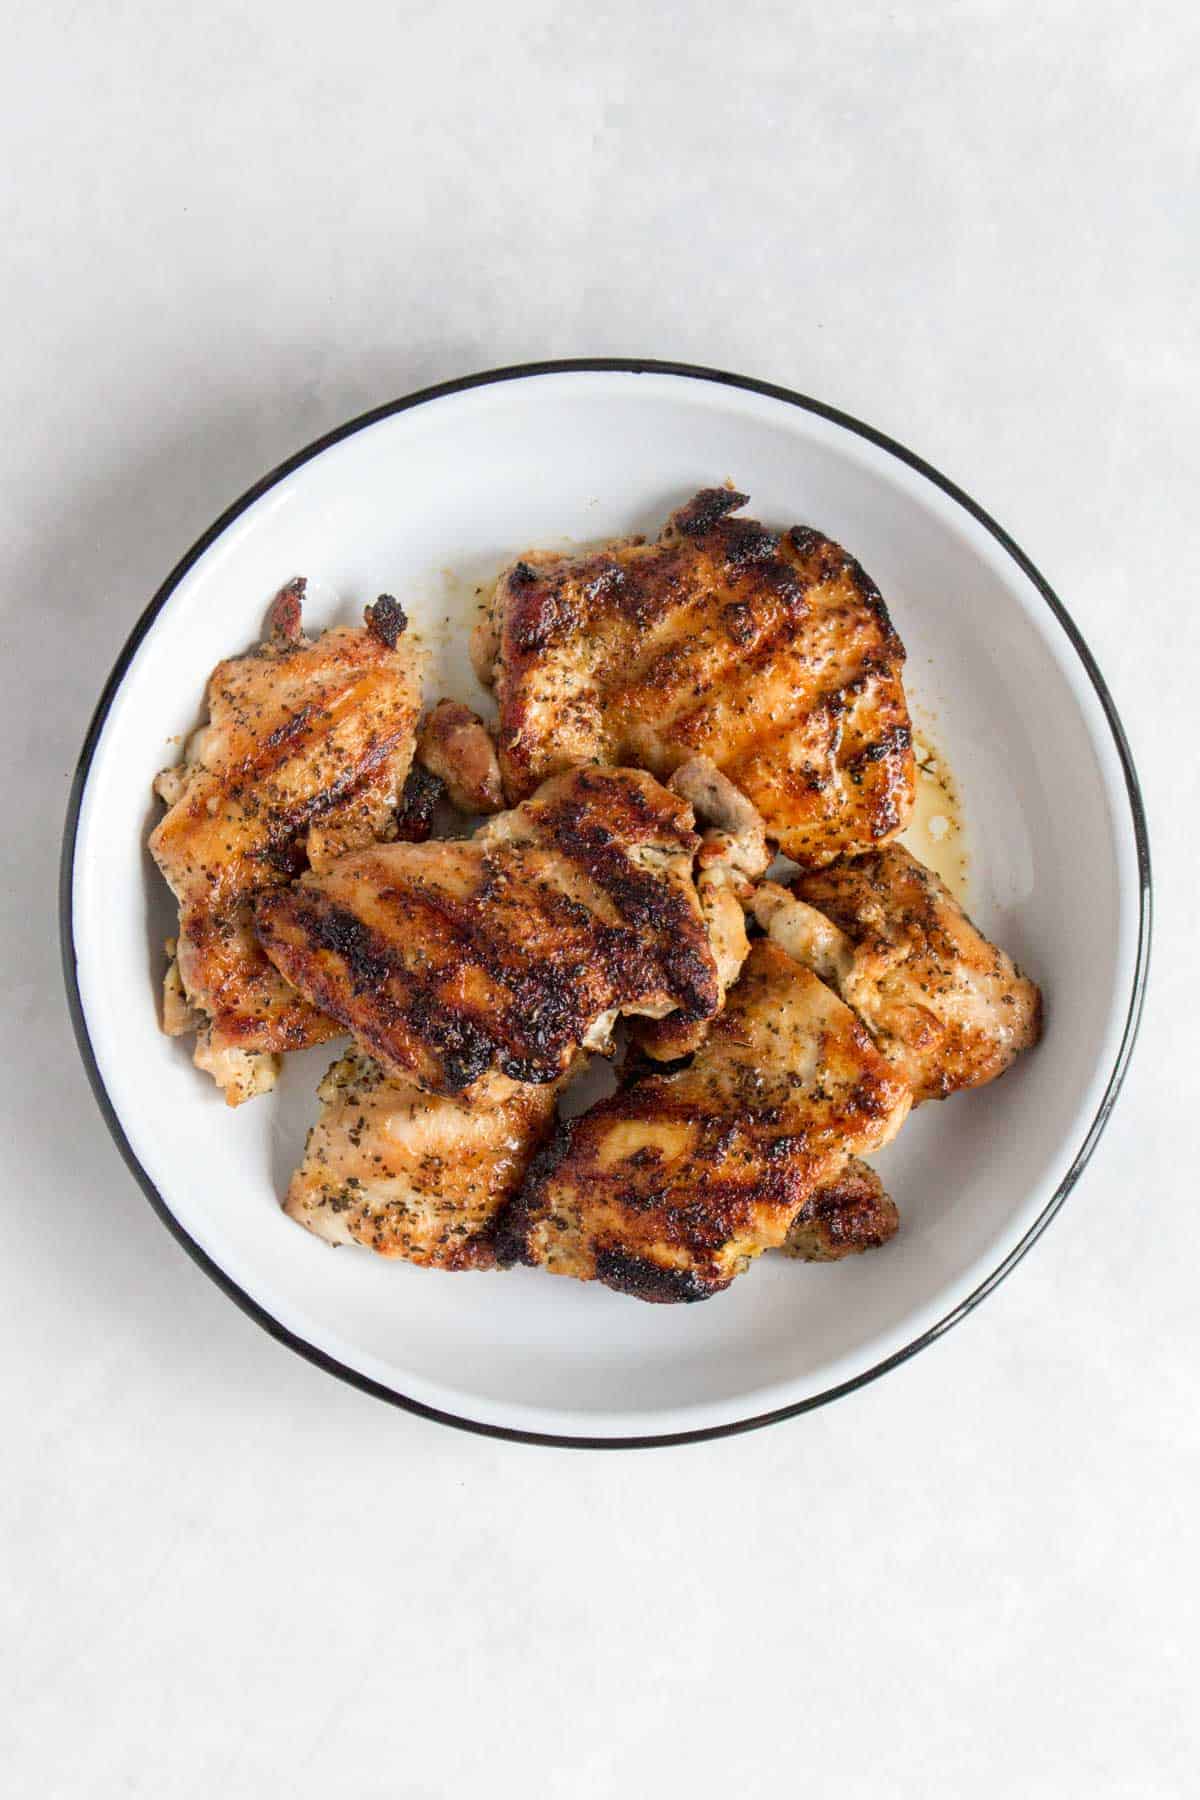 Grilled chicken thighs in a plate.